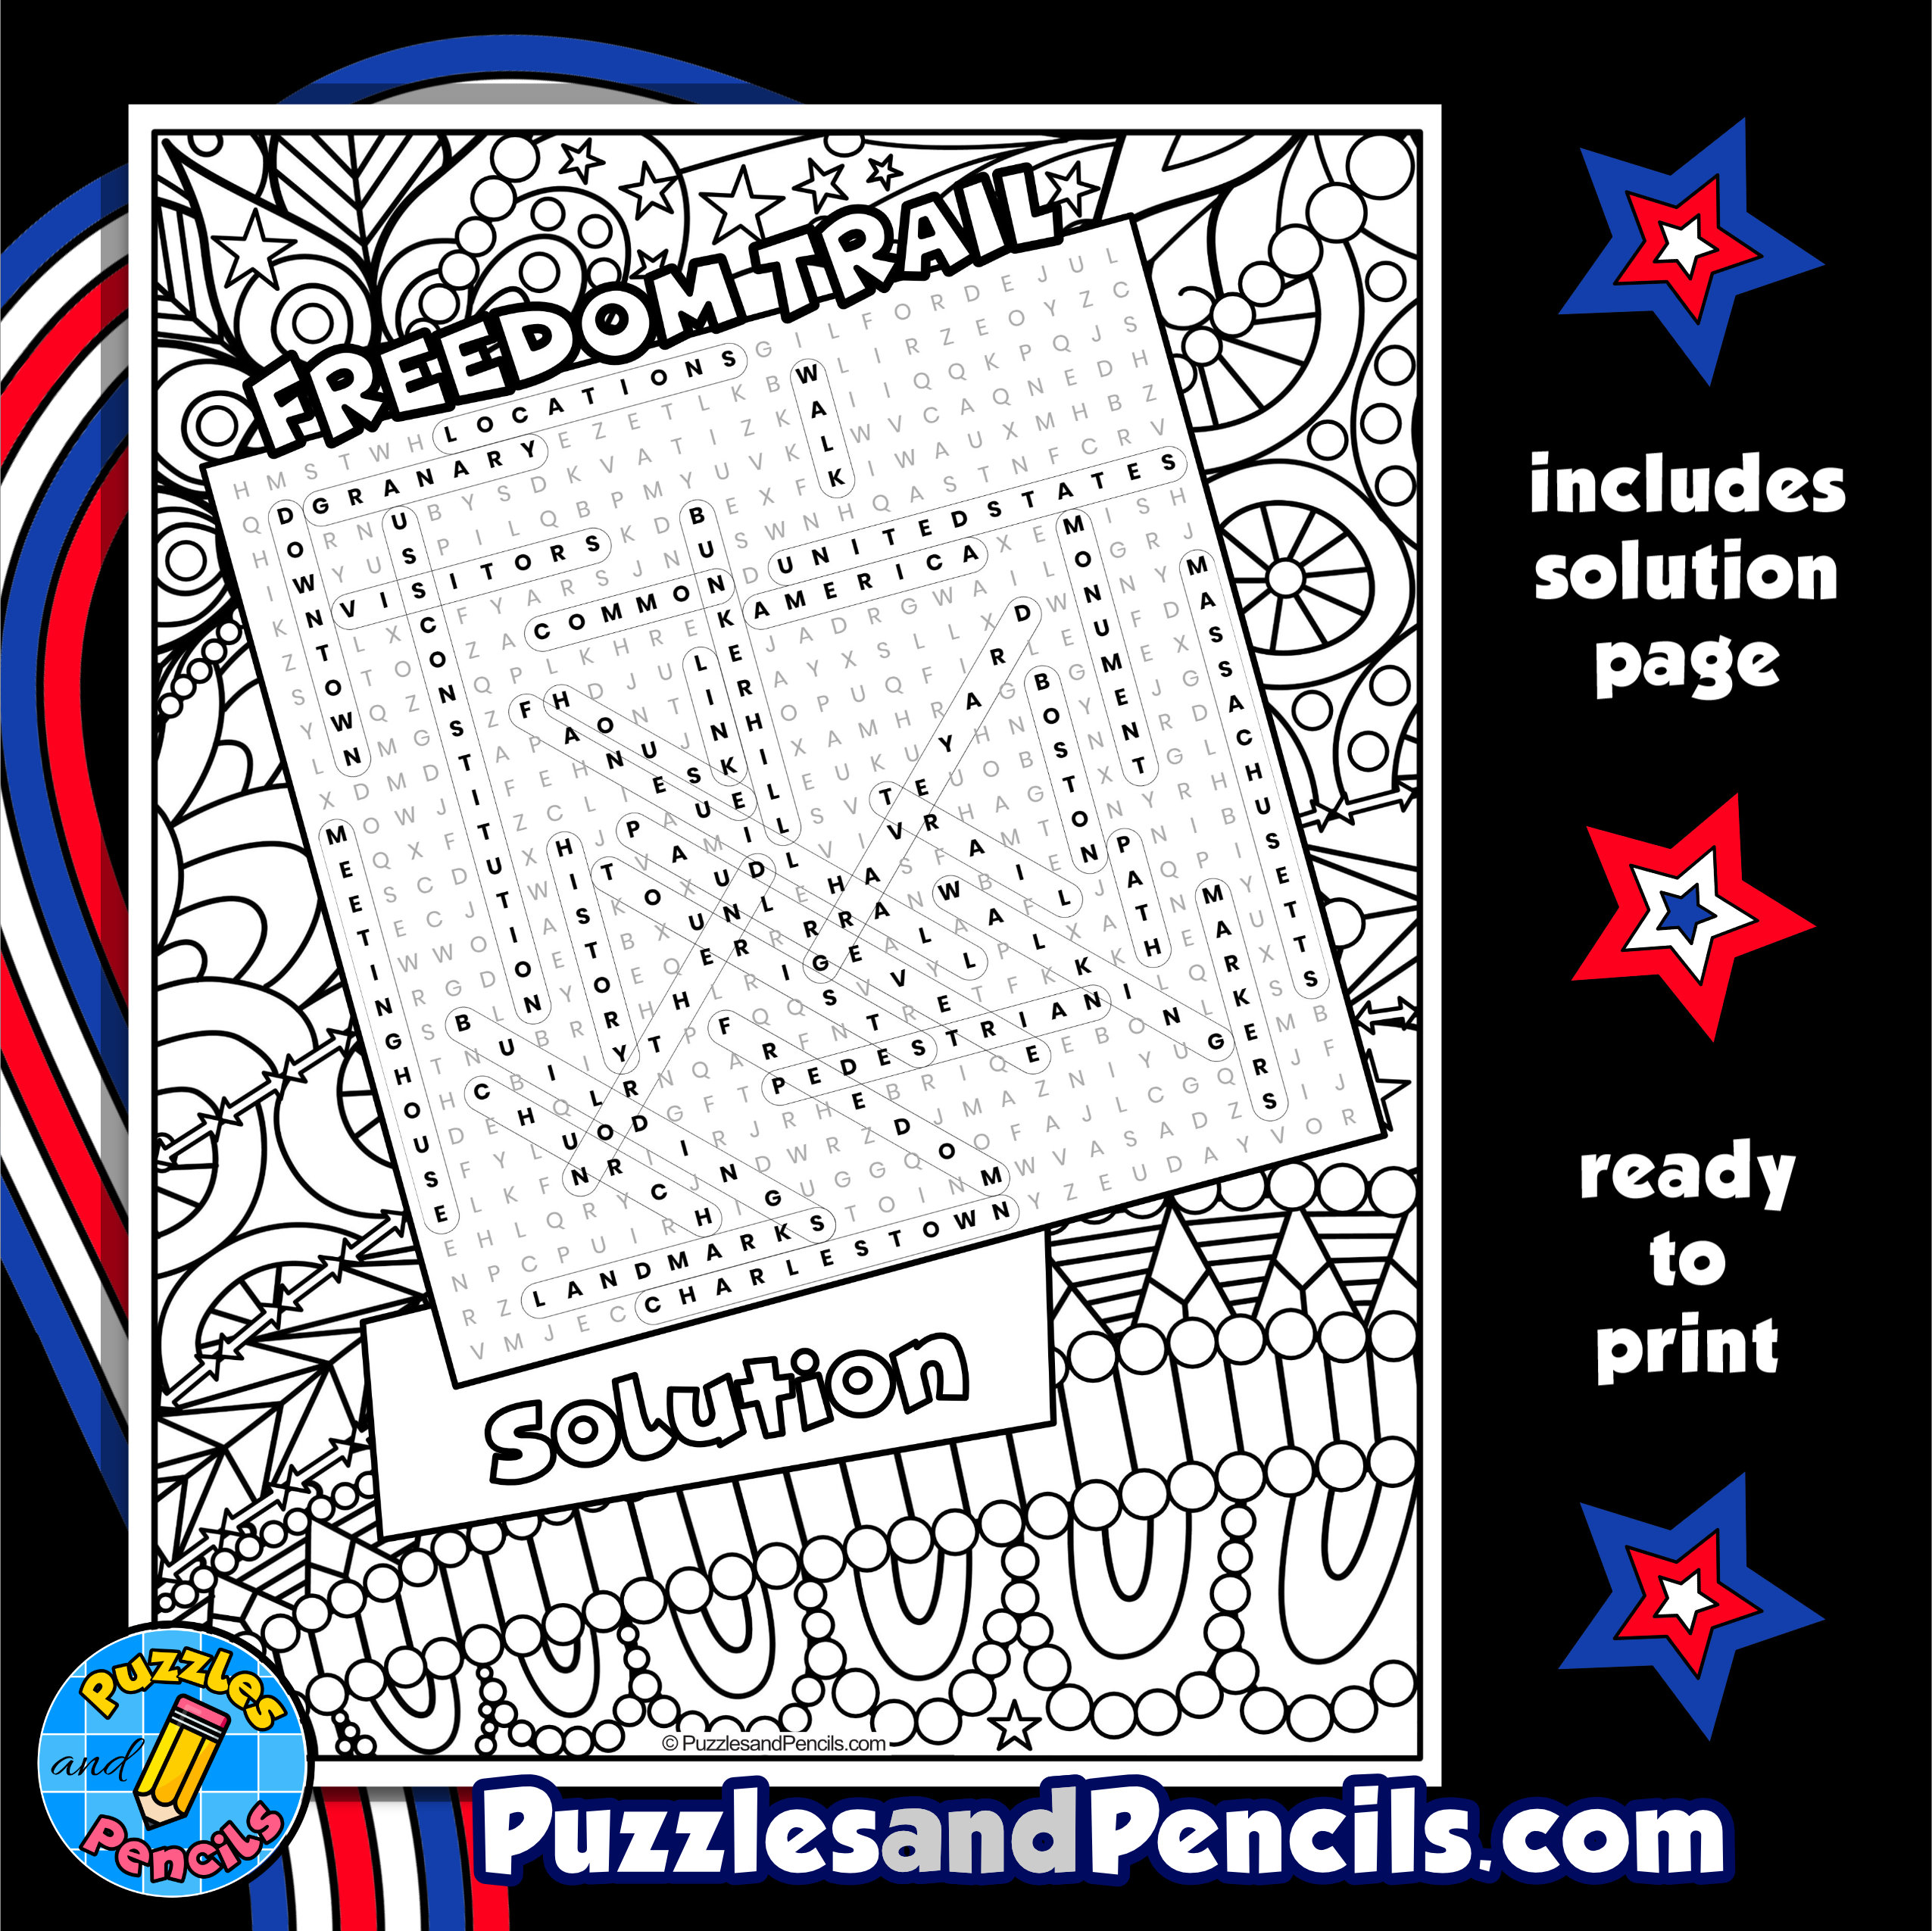 Freedom trail word search puzzle with coloring us tourist attractions wordsearch made by teachers